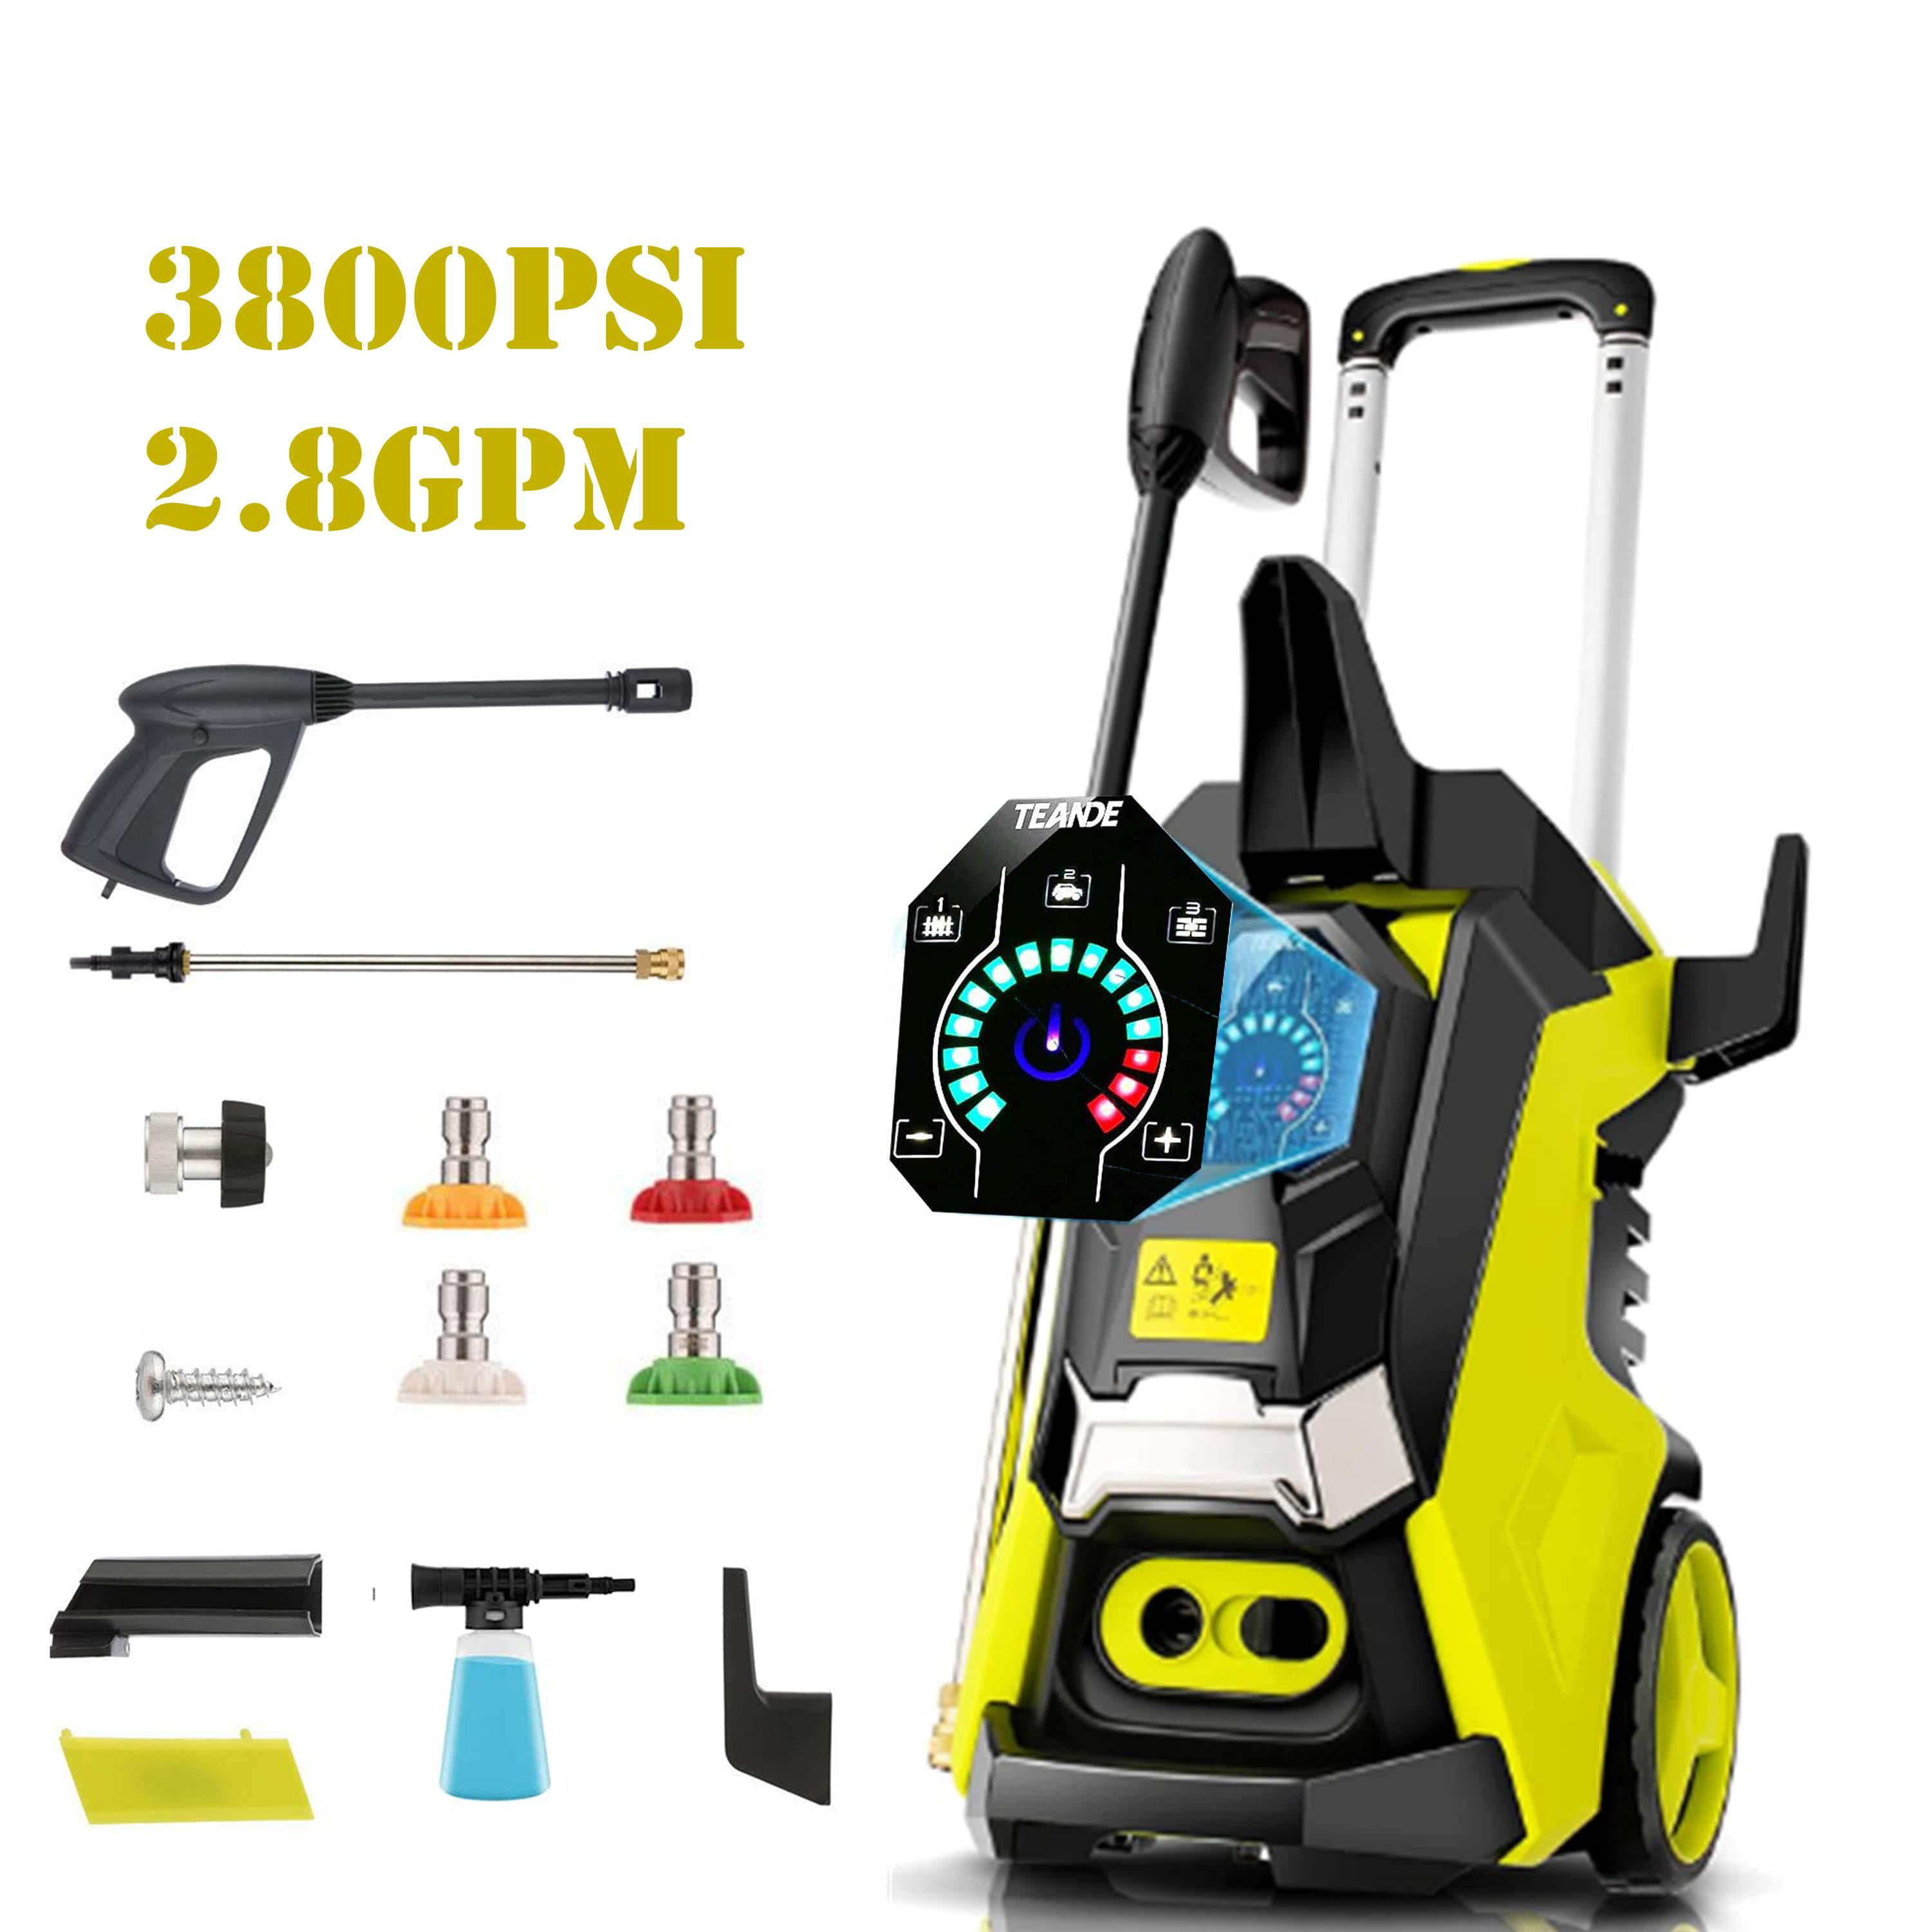 3800 PSI Professional Electric Pressure Washer 2.80GPM, 1800W Rolling Wheels High Pressure Washer Cleaner Machine with Power Hose Nozzle Gun and 4 Quick-Connect spray tips